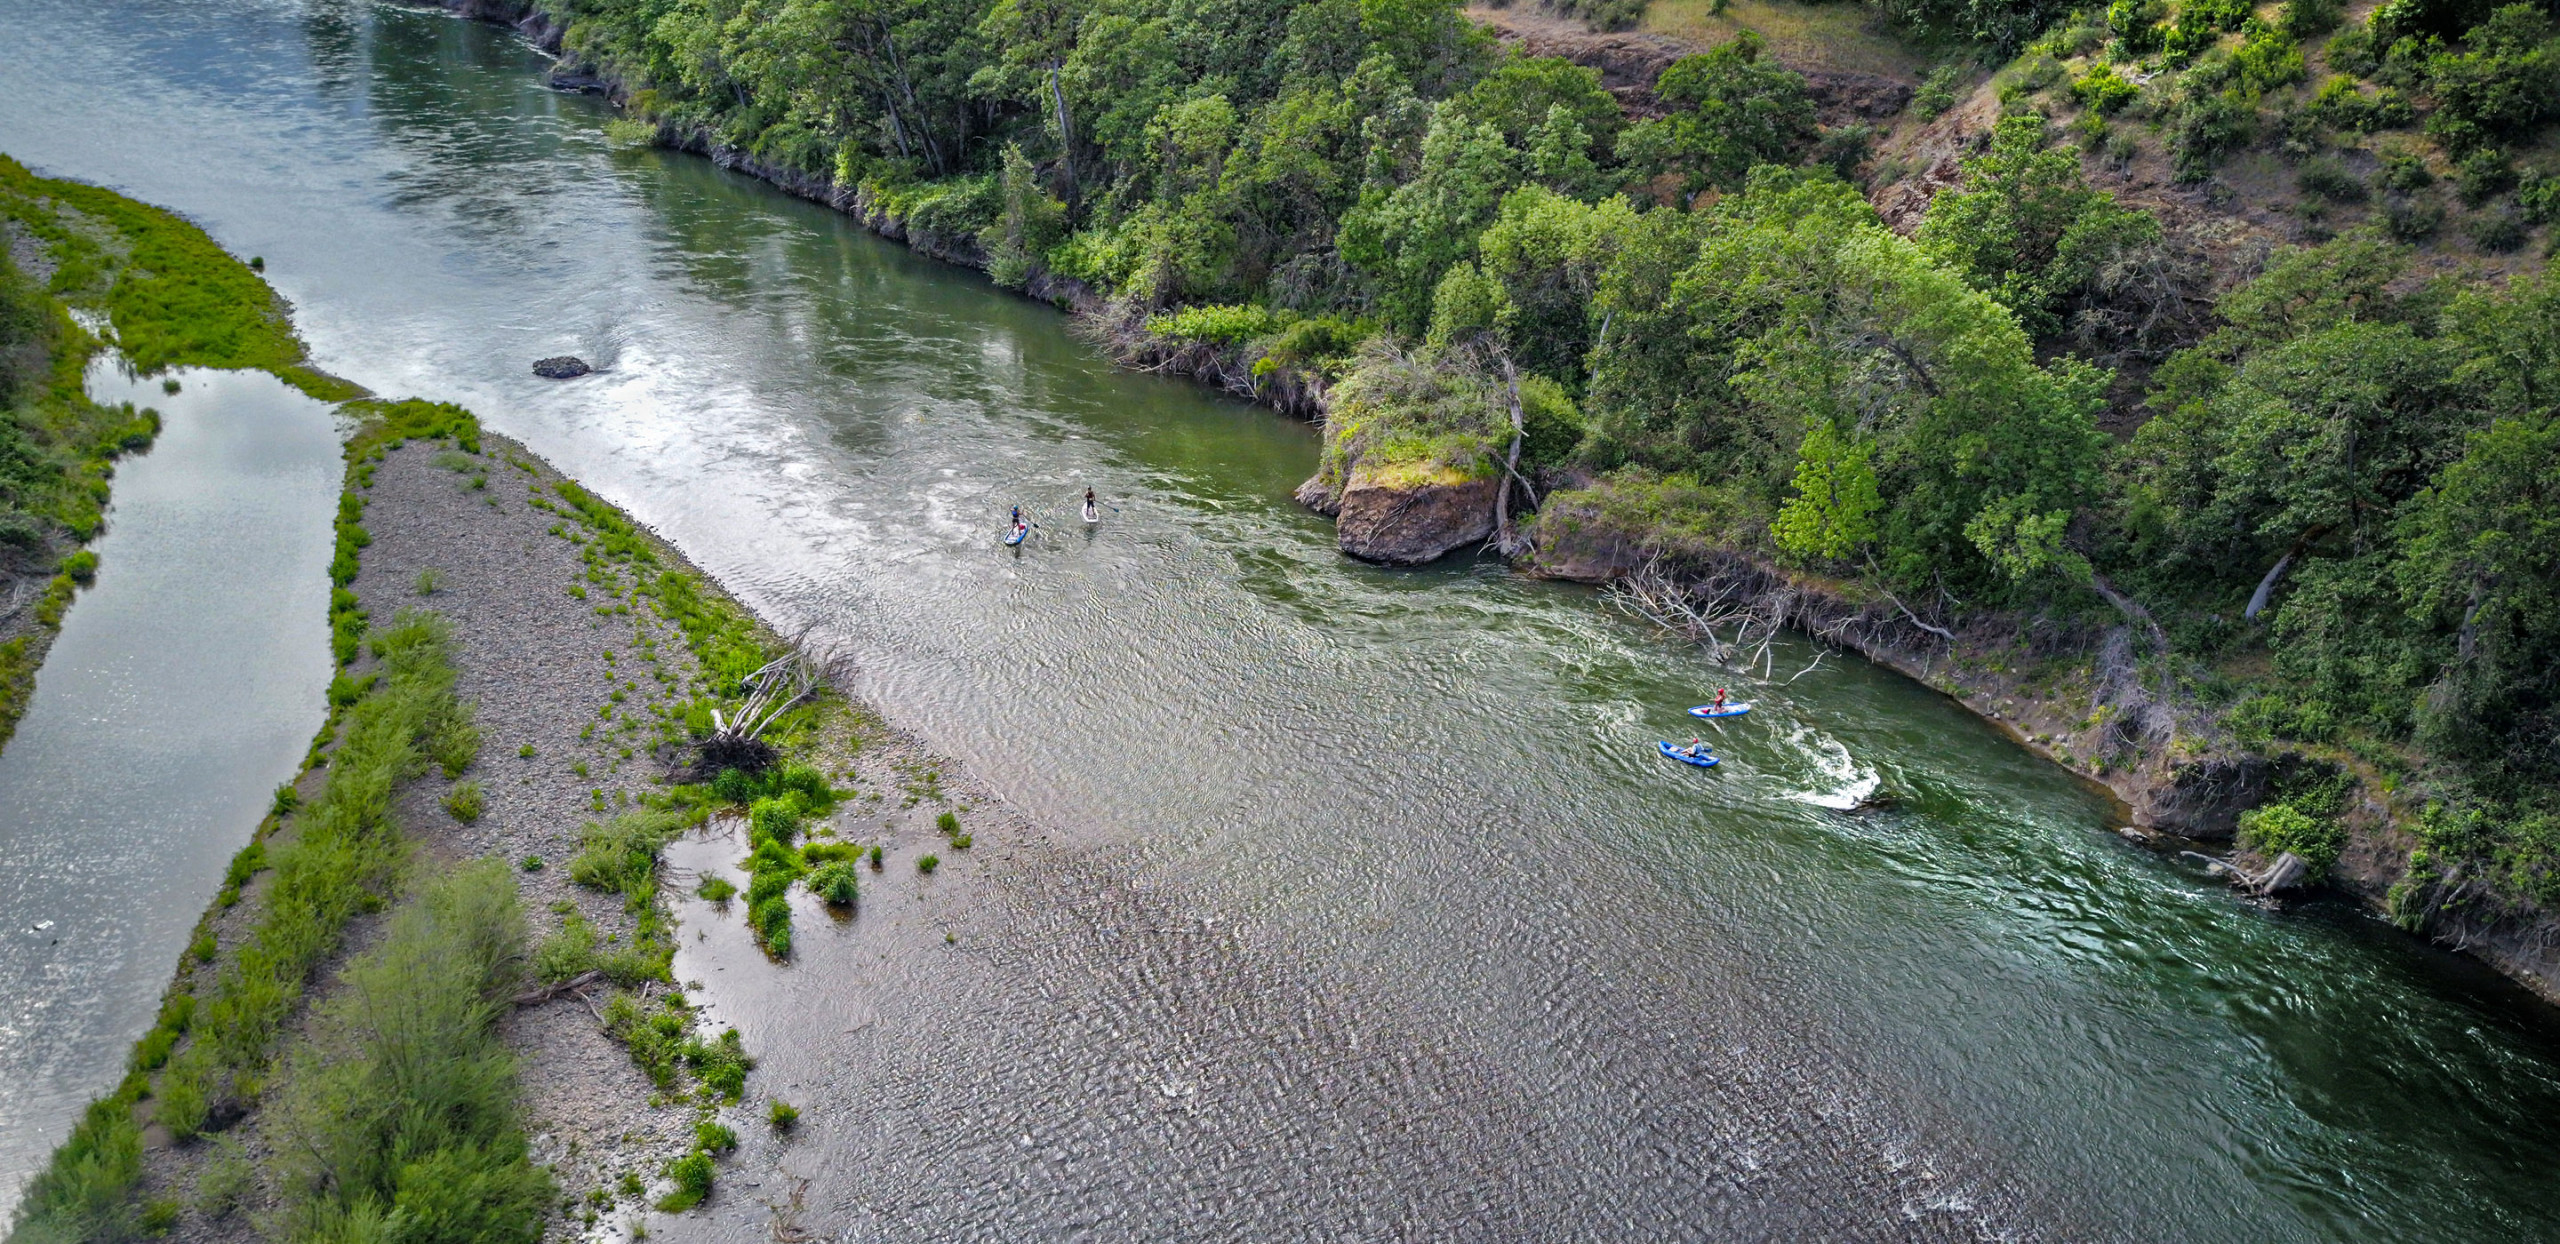 Rogue River Stand Up Paddleboarding - Ashland Oregon Day Trips